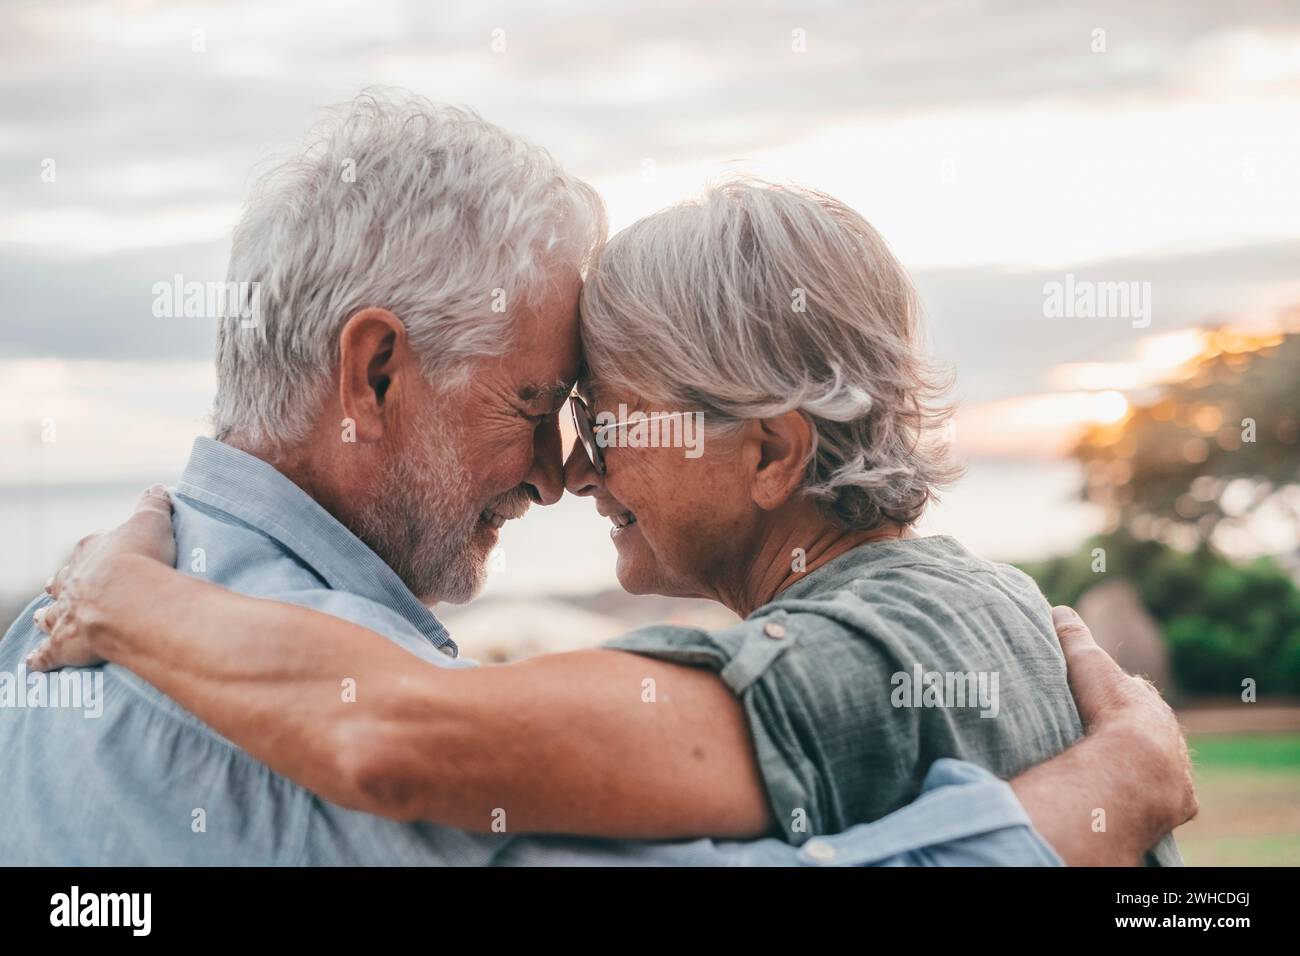 Head shot close up portrait happy grey haired middle aged woman snuggling to smiling older husband, enjoying sitting on bench at park. Bonding loving old family couple embracing, looking sunset. Stock Photo